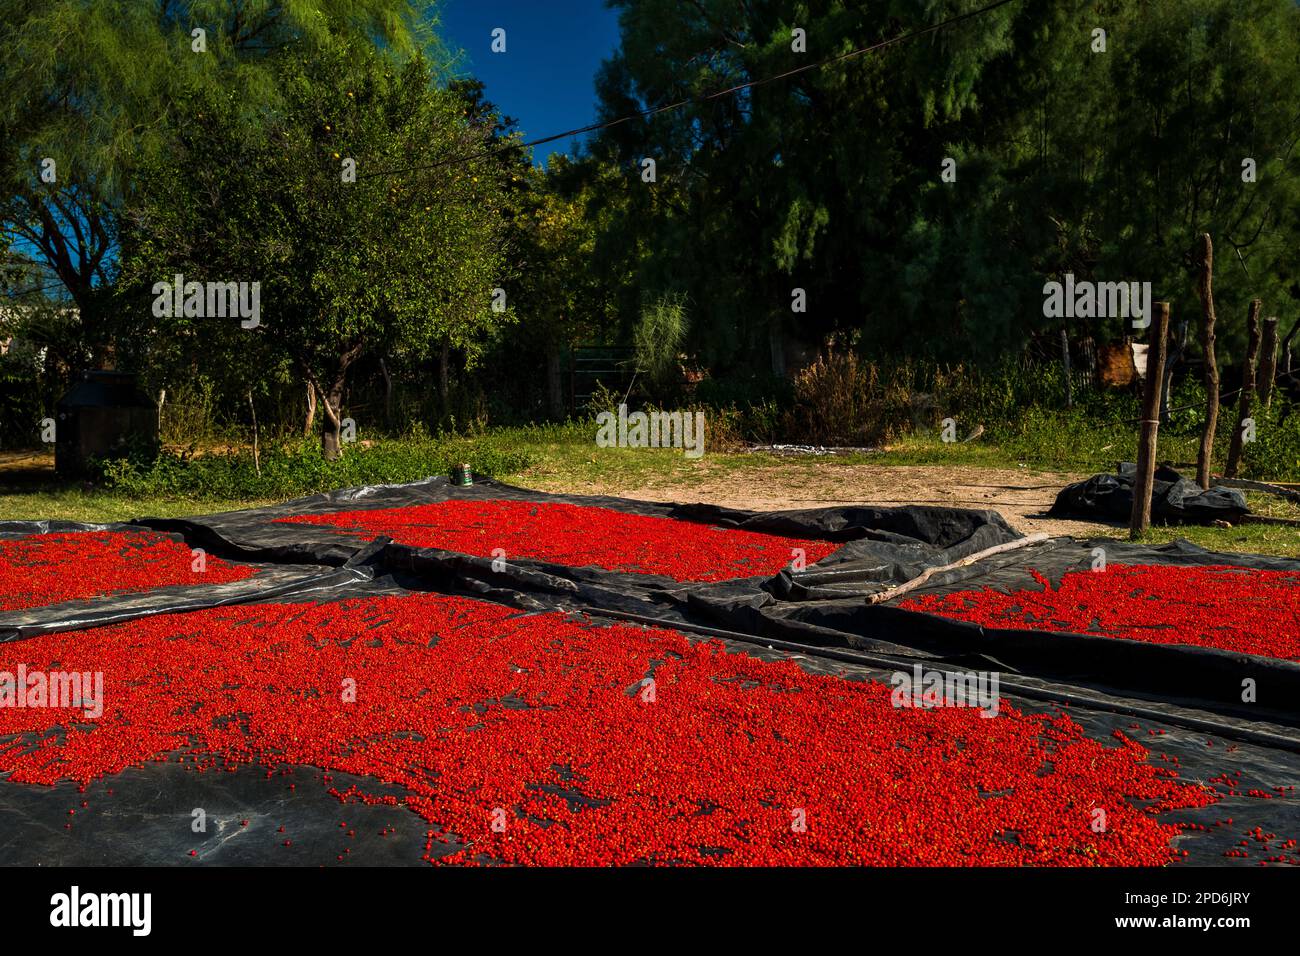 Chiltepin peppers, a wild variety of chili pepper, are seen drying on tarps during the sun-drying process on a farm near Baviácora, Sonora, Mexico. Stock Photo